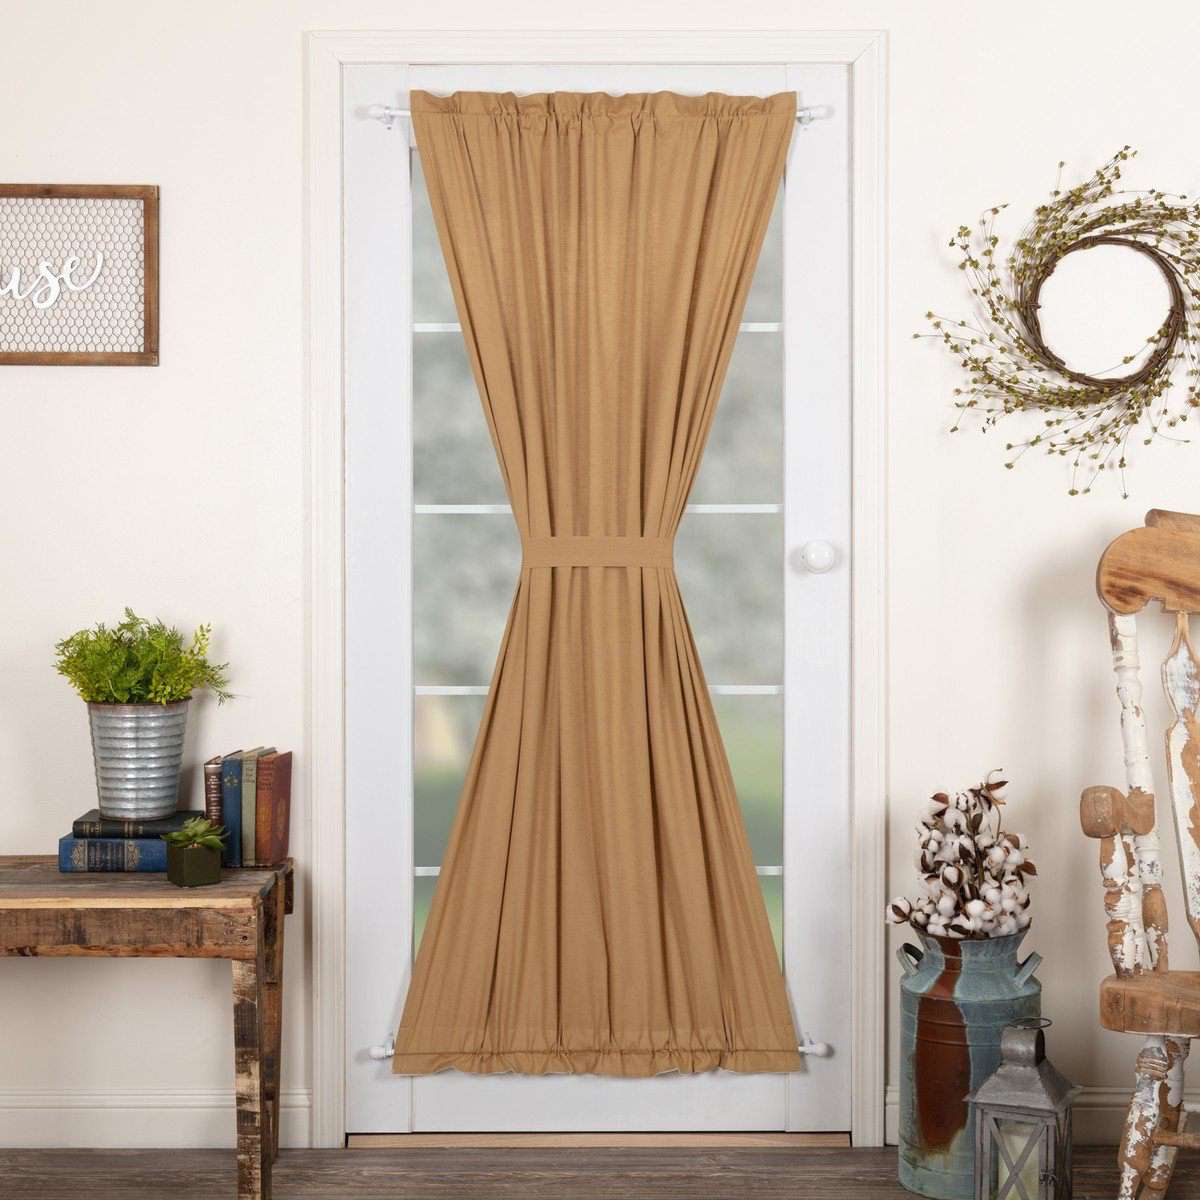 Simple Life Flax Khaki/Antique White/Natural Door Panel 72"x40" curtain VHC Brands 